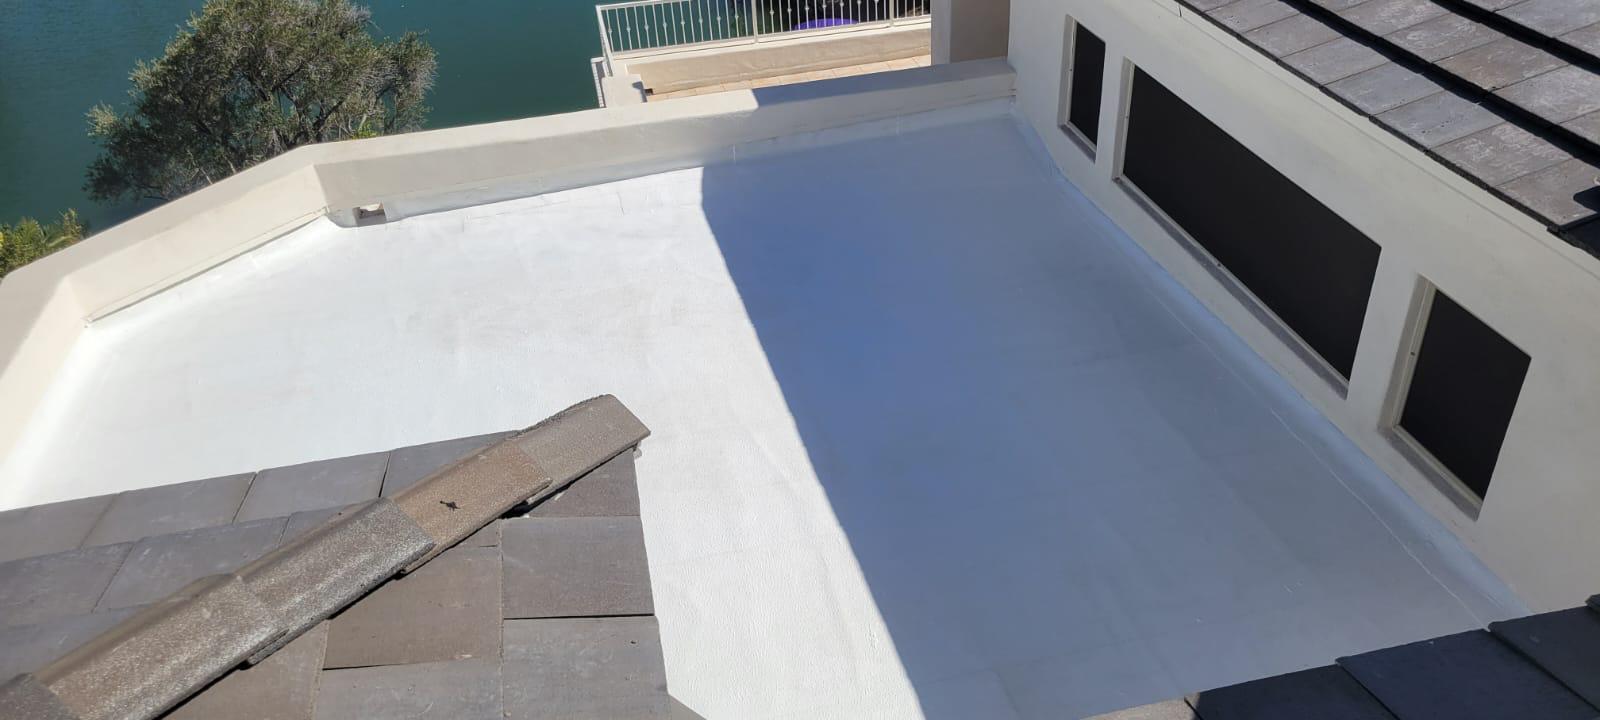 A McCormick Ranch building's flat roof with a newly installed spray foam coating, offering a sleek, modern appearance.